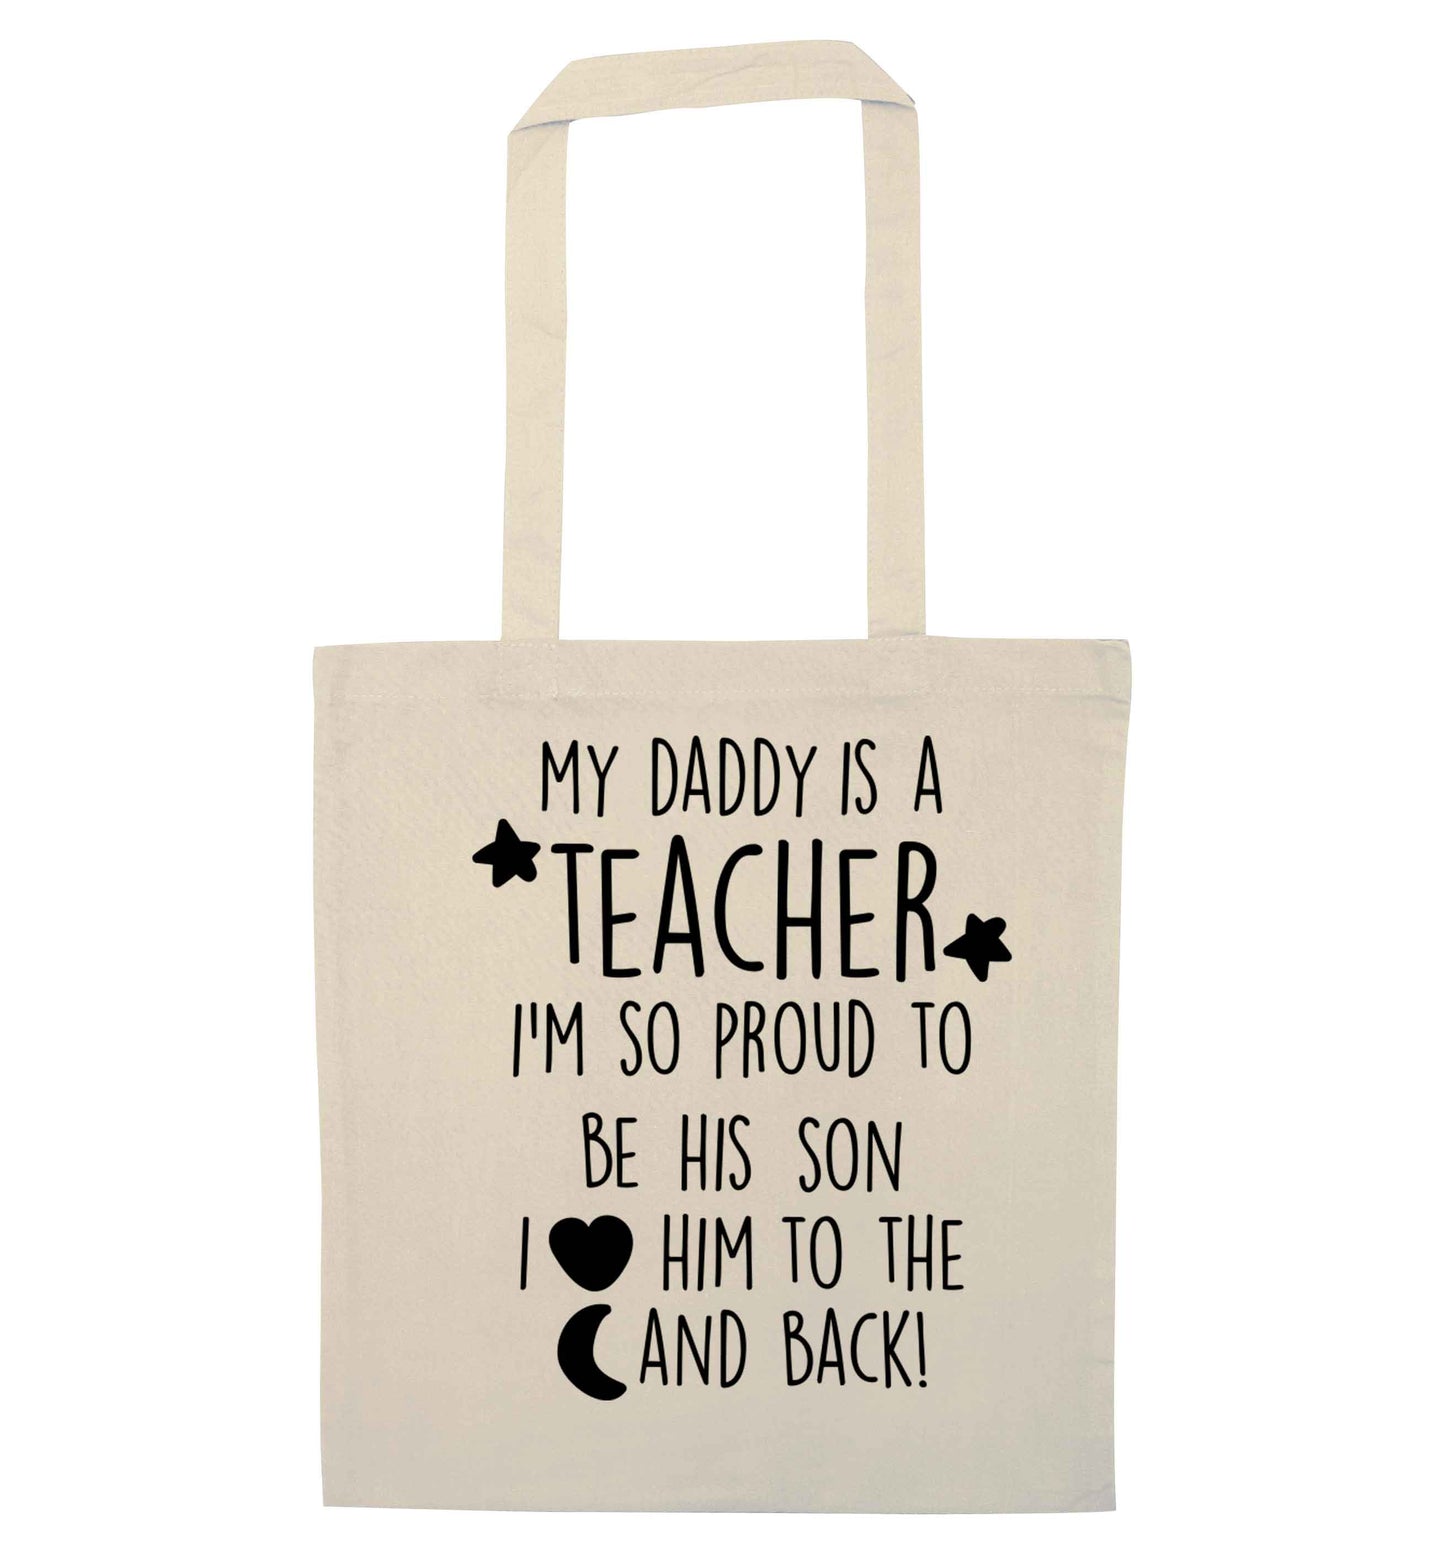 My daddy is a teacher I'm so proud to be his son I love her to the moon and back natural tote bag